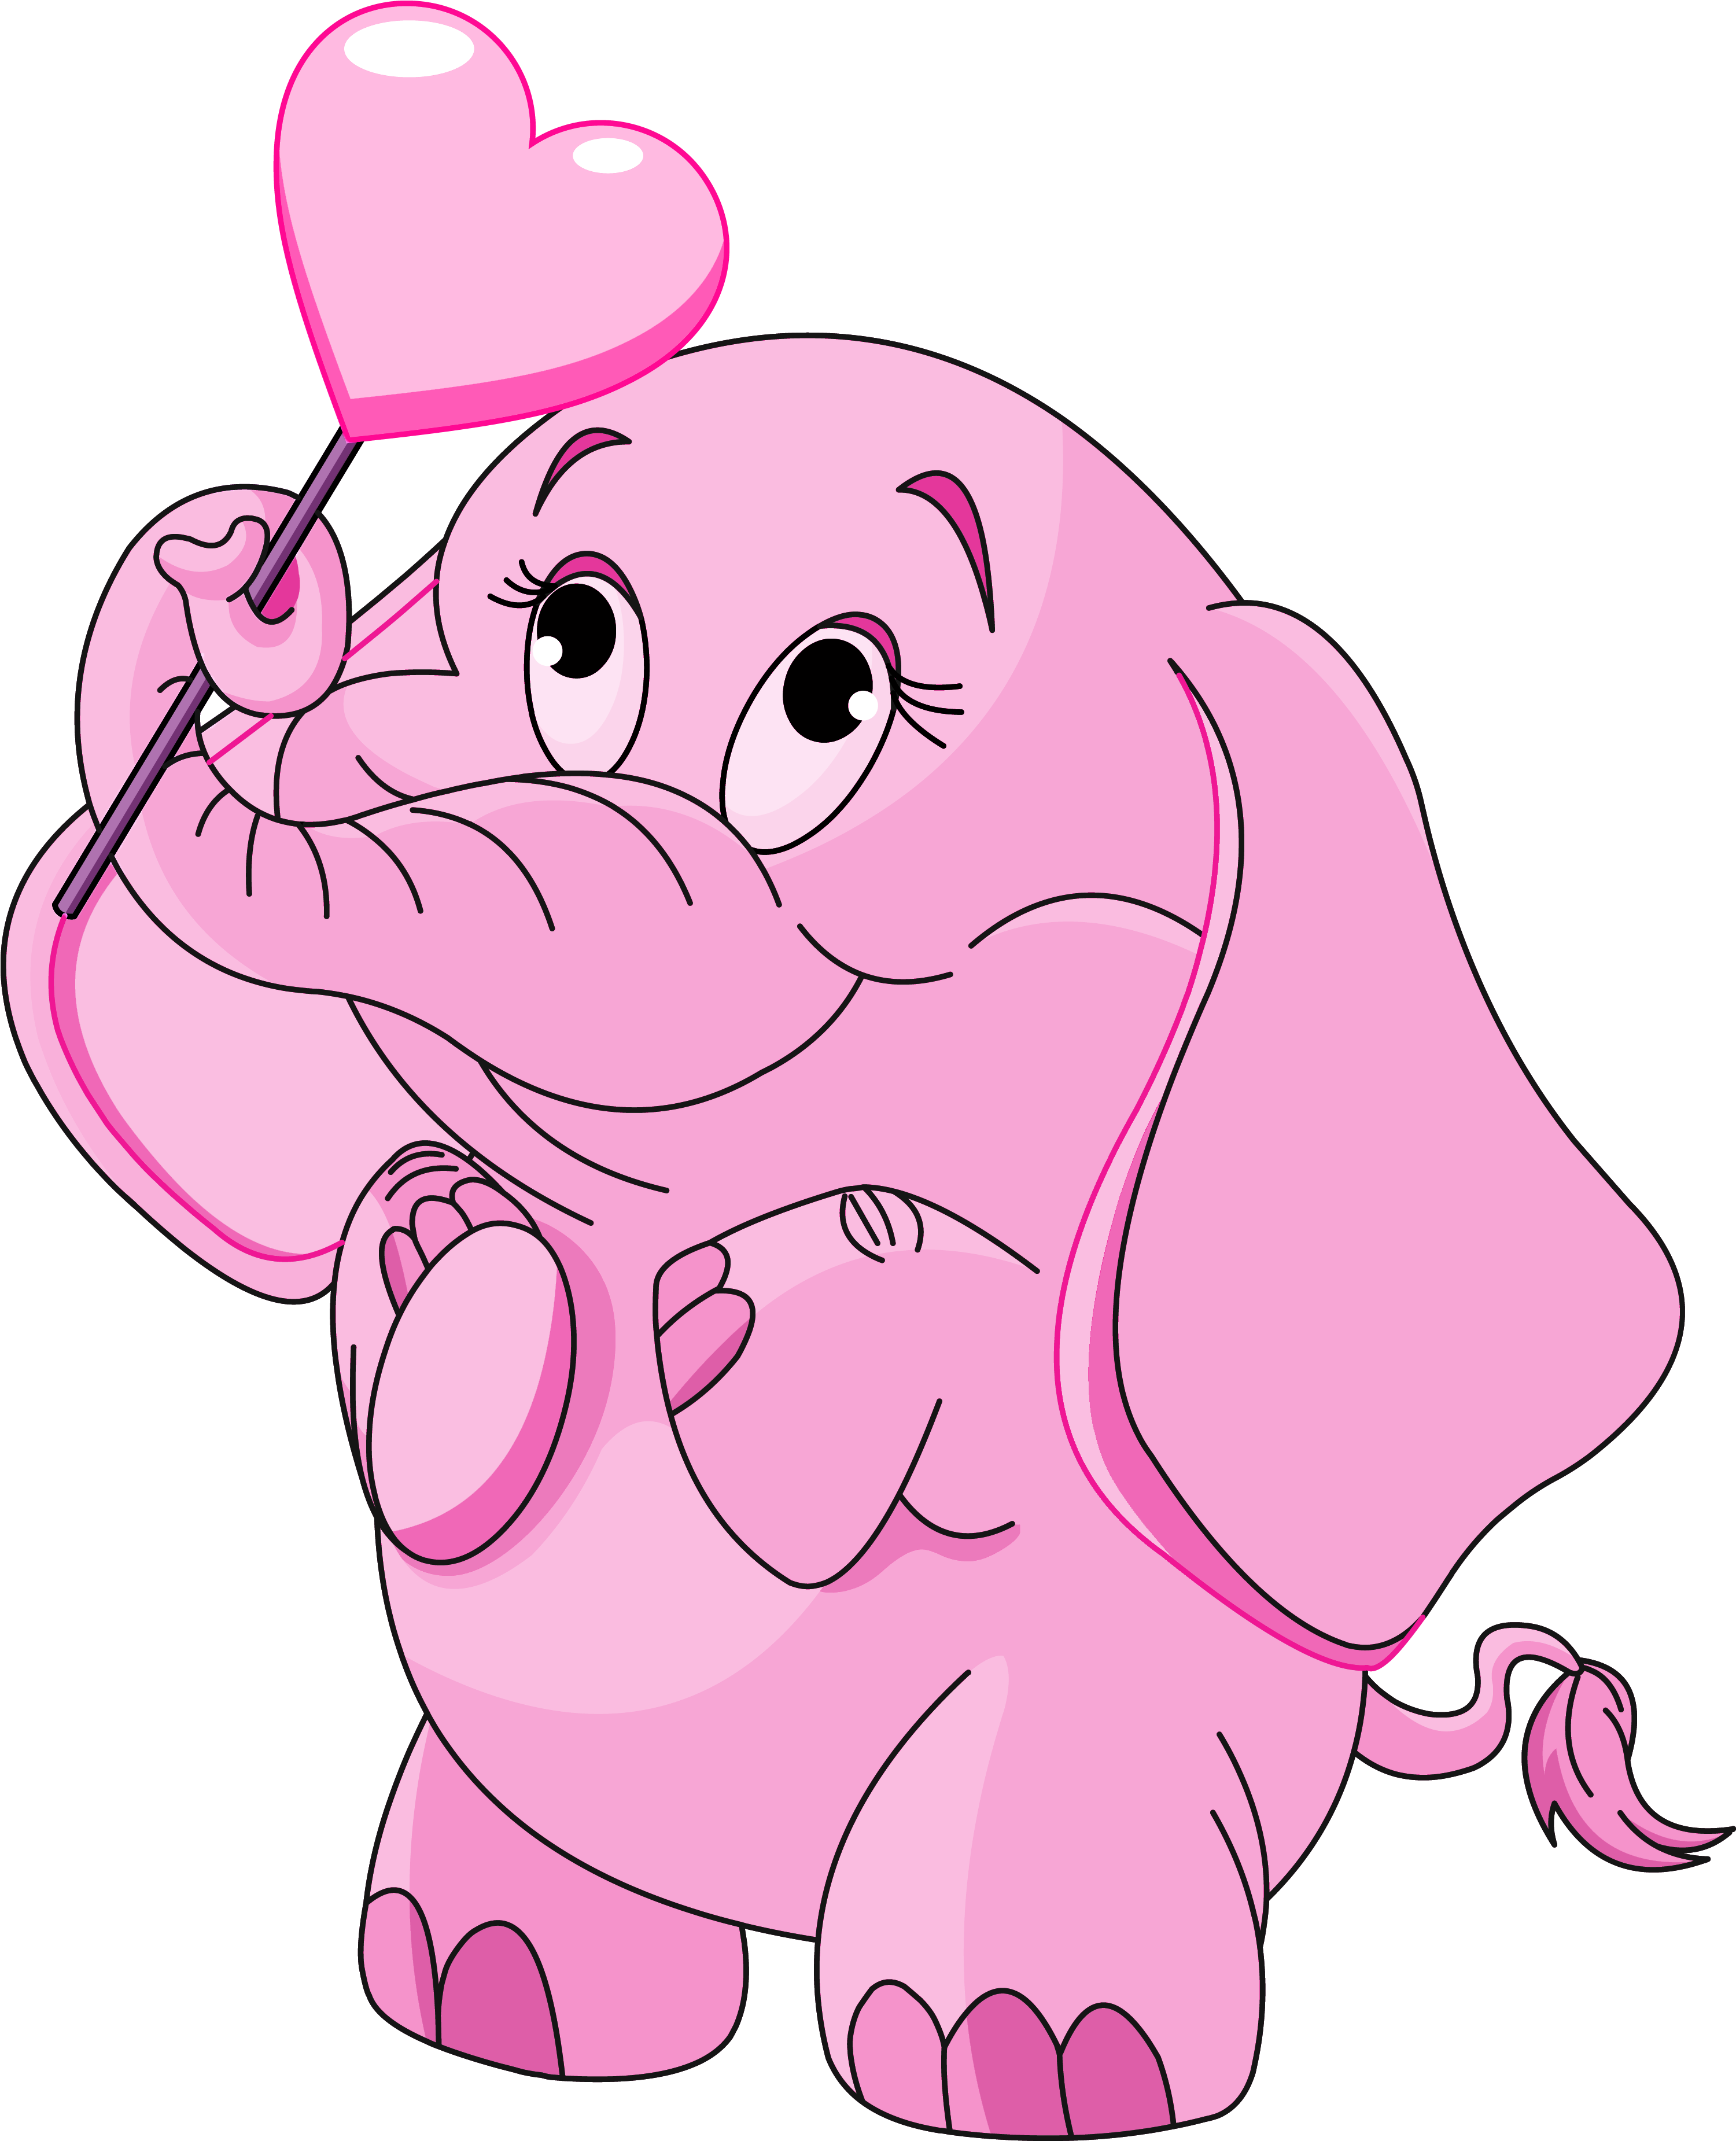 Download Pink Cartoon Elephant Png PNG Image with No Background 